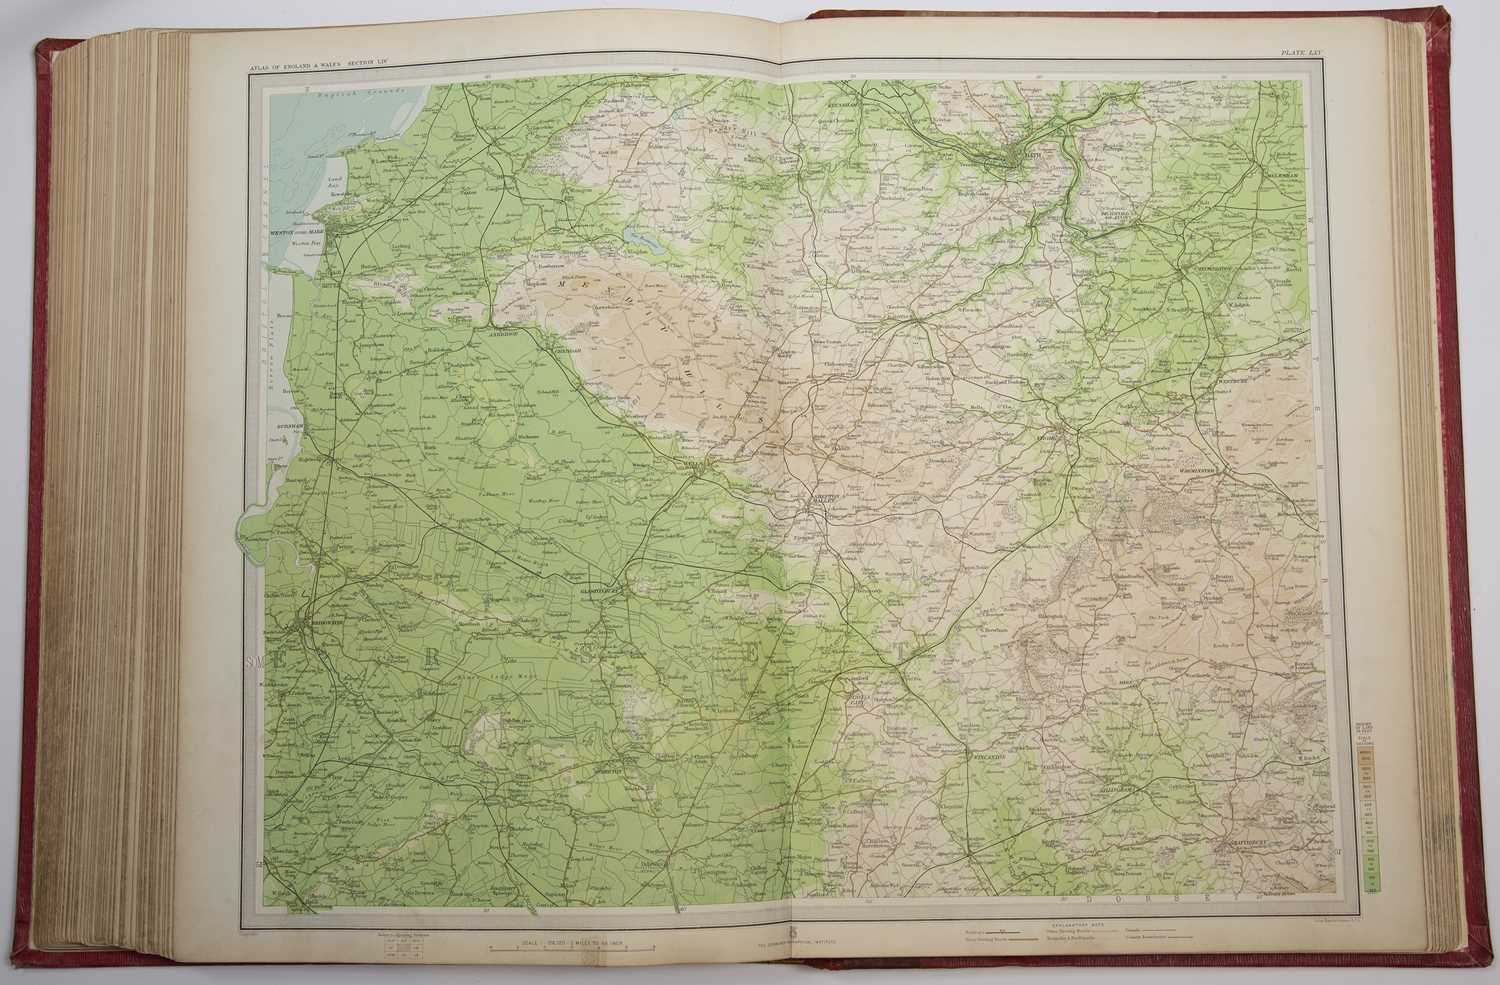 Bartholomew (John) The Survey Atlas of England and Wales. 84 plates of maps and plans. The Royal - Image 3 of 3